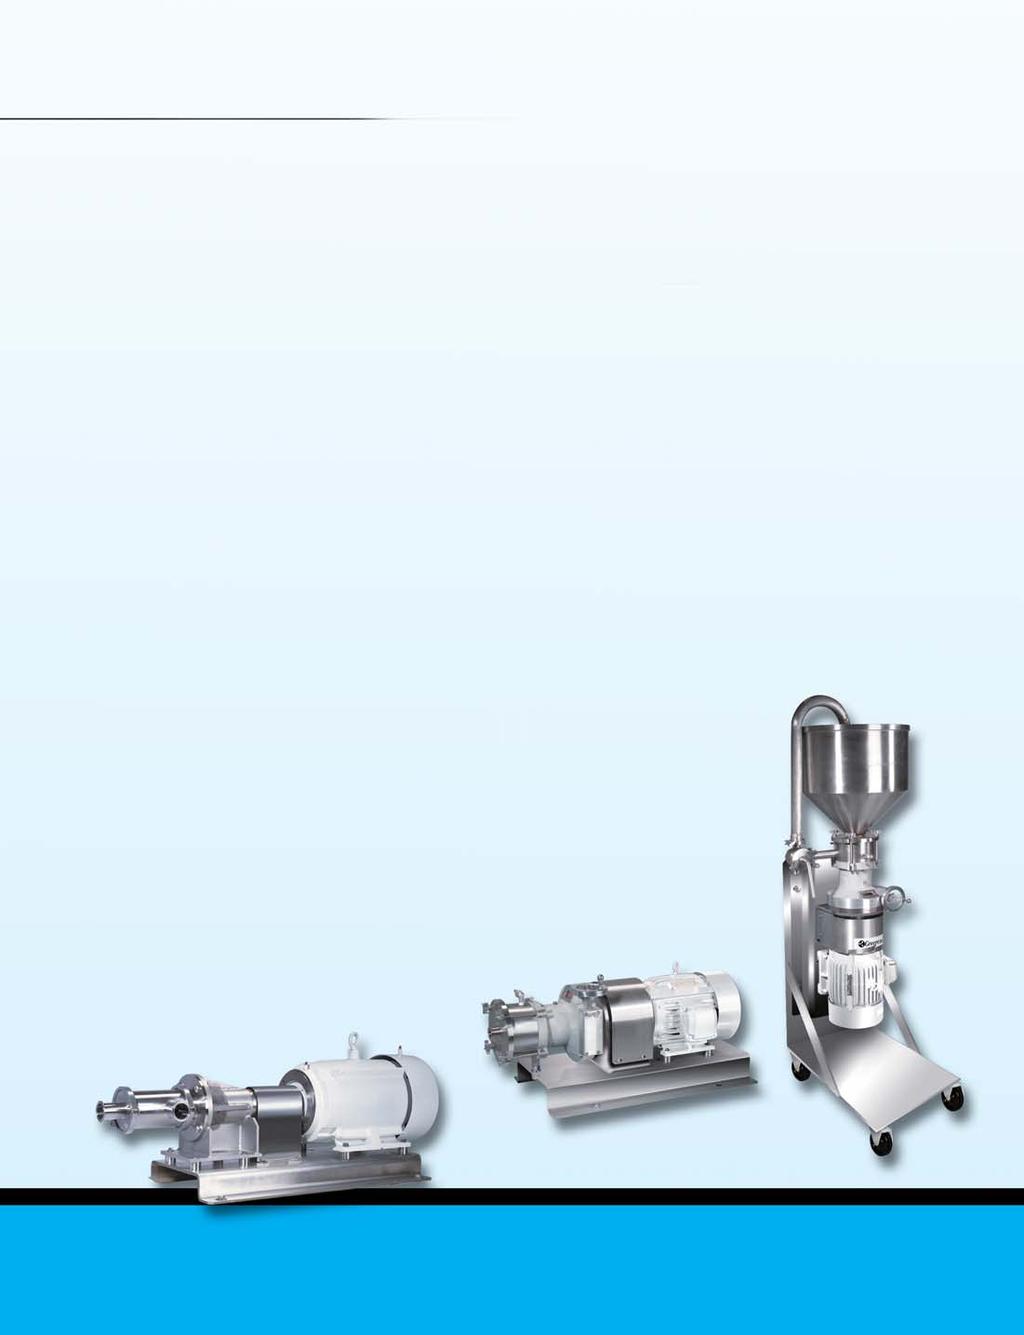 Greerco products provide flexible, cost efficient in-line and batch processing for sanitary, high-shear applications.